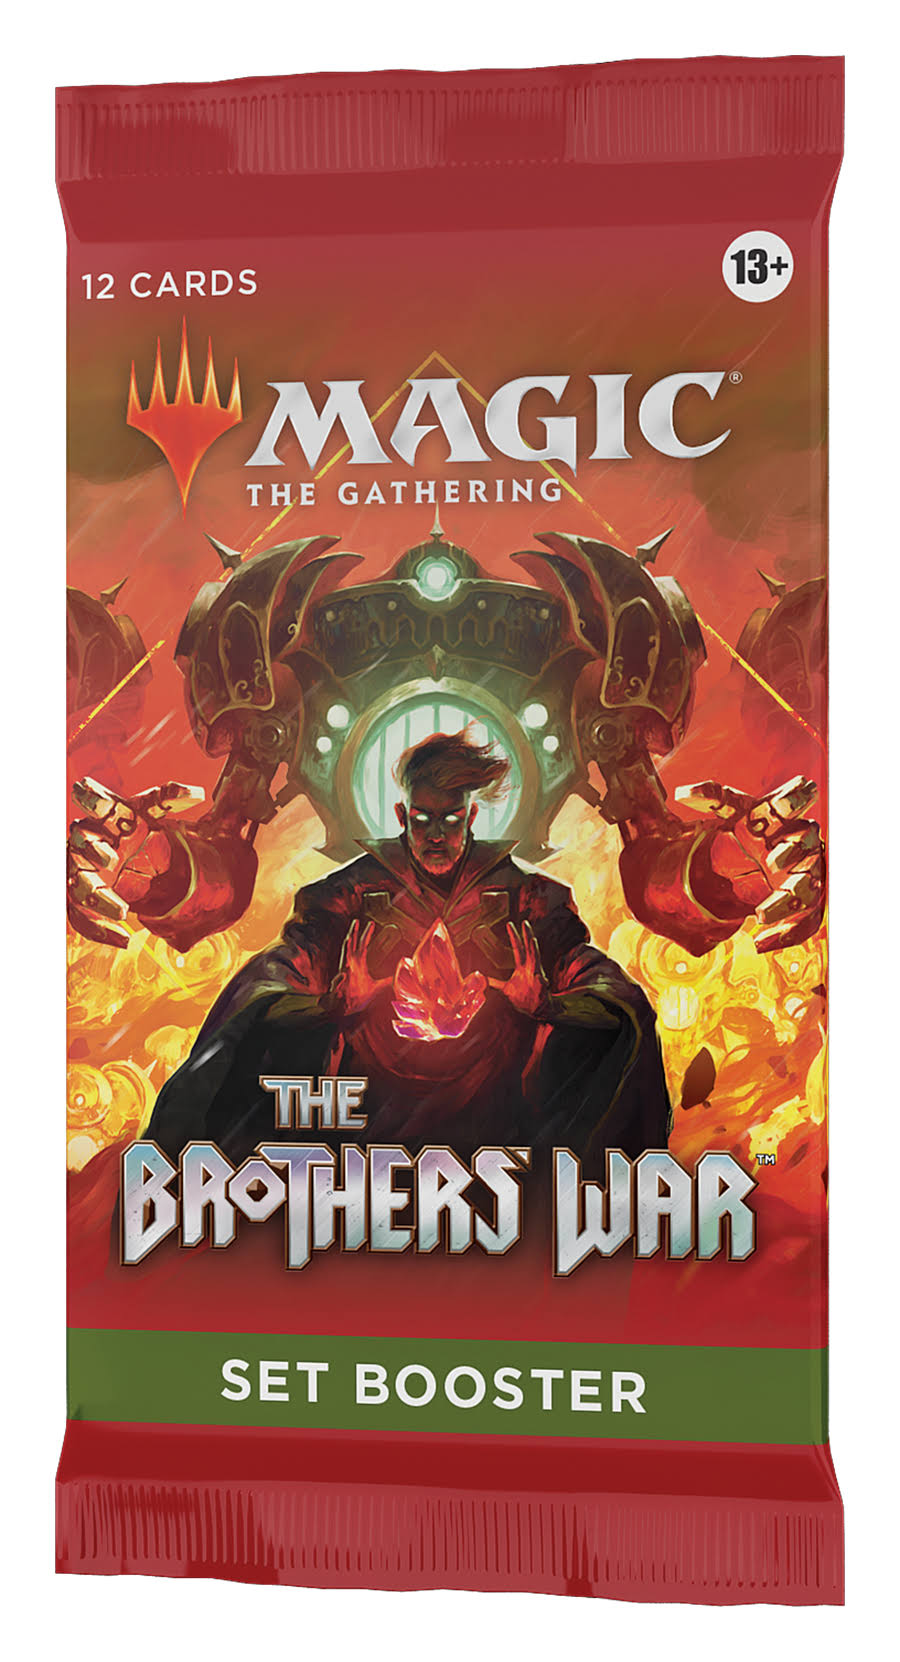 Magic The Gathering - The Brothers War (Set Booster Pack)